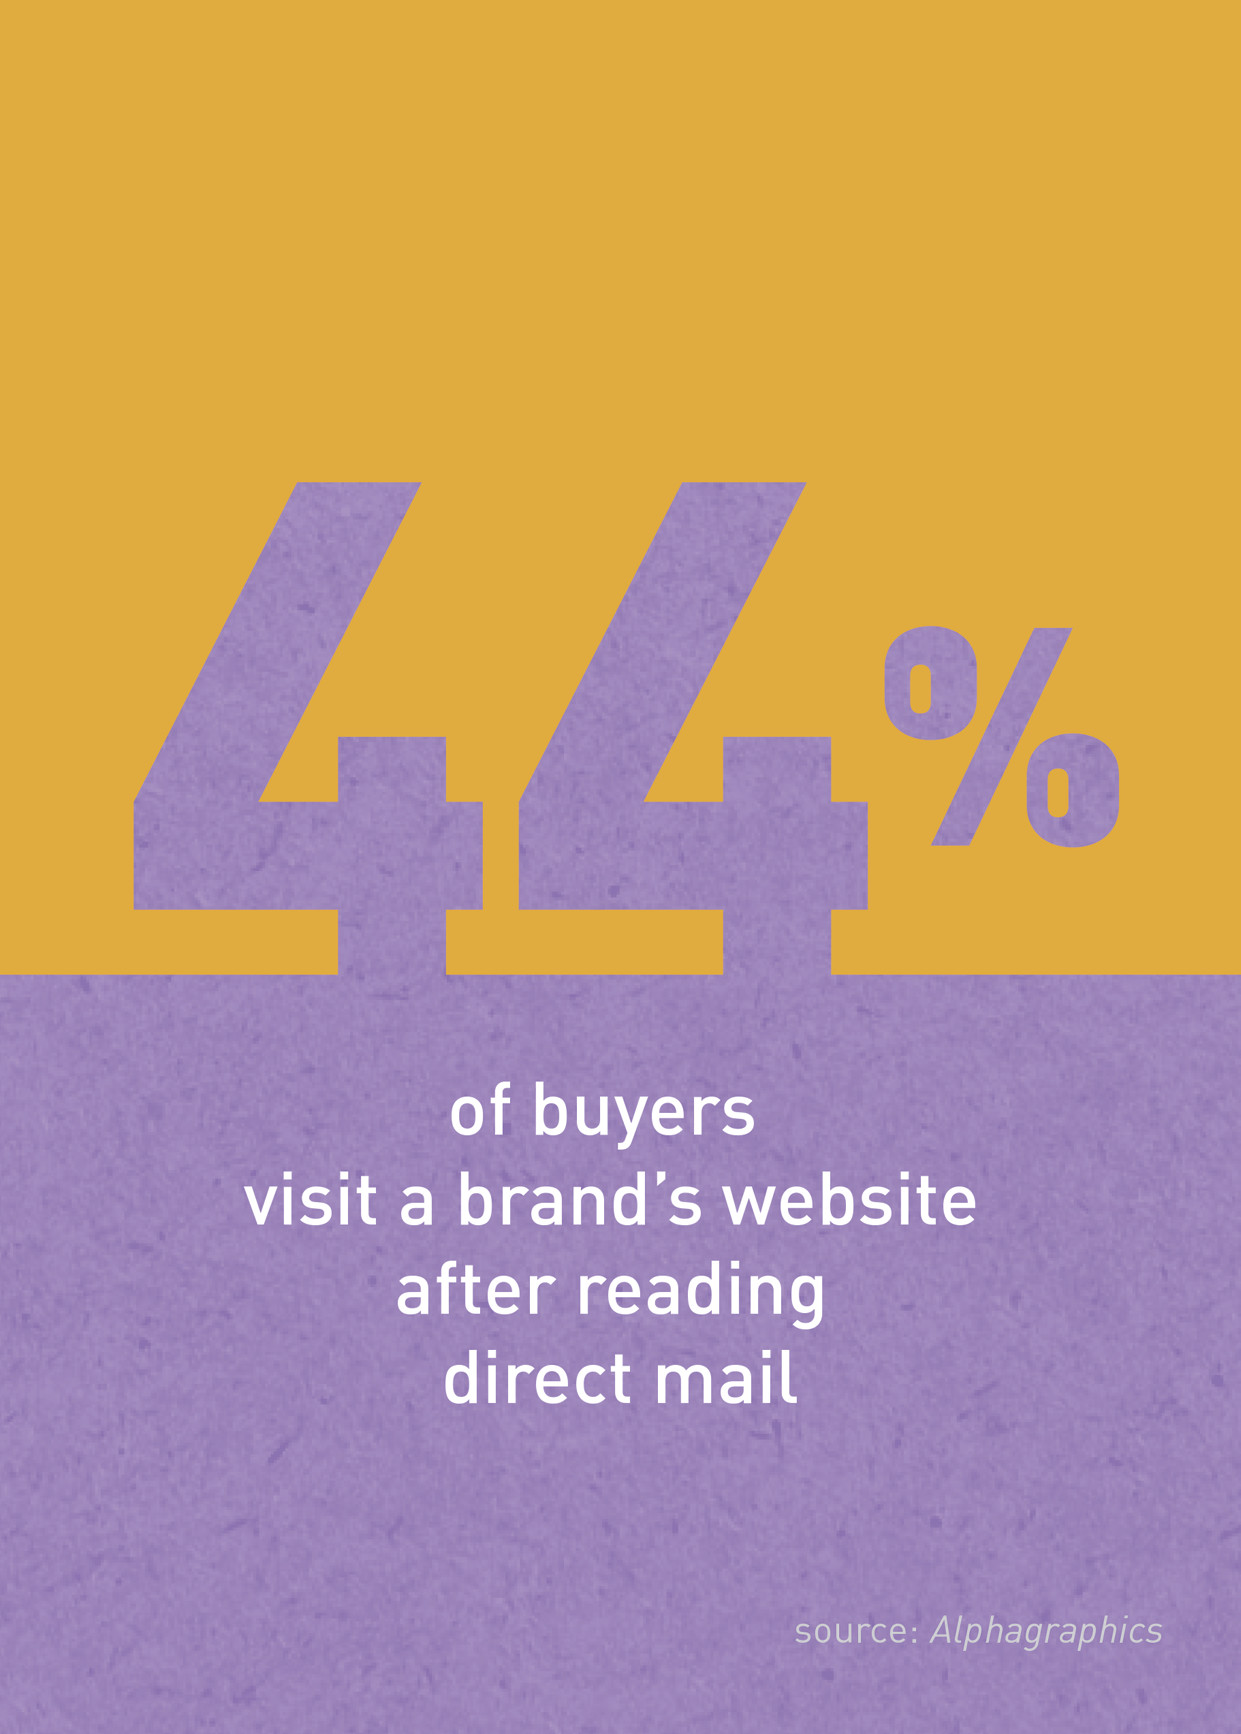 Infographic: 44% of buyers visit a brand's website after reading direct mail